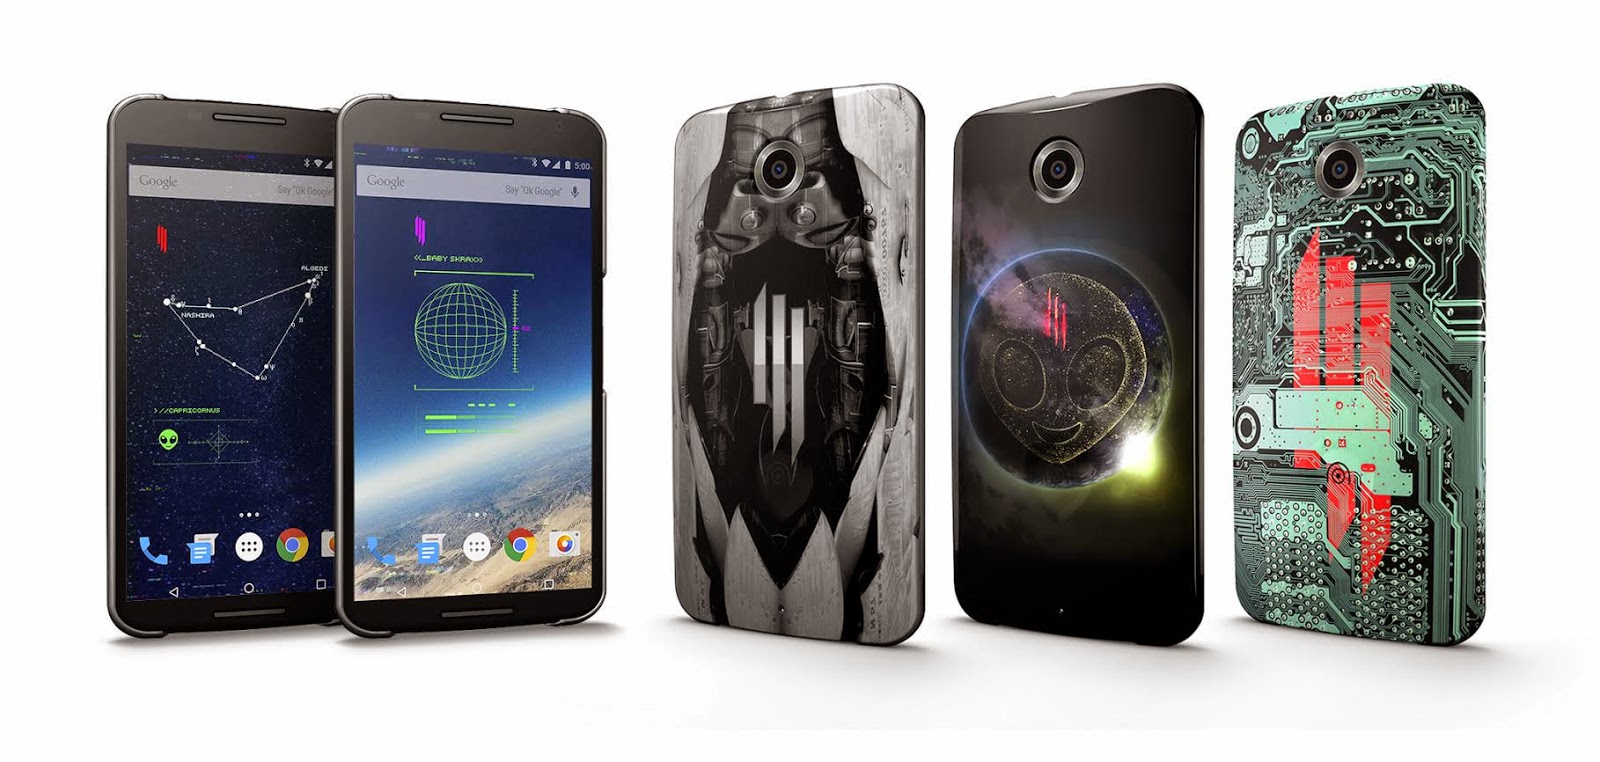 Google partners with Skrillex to release Limited Edition Live Cases